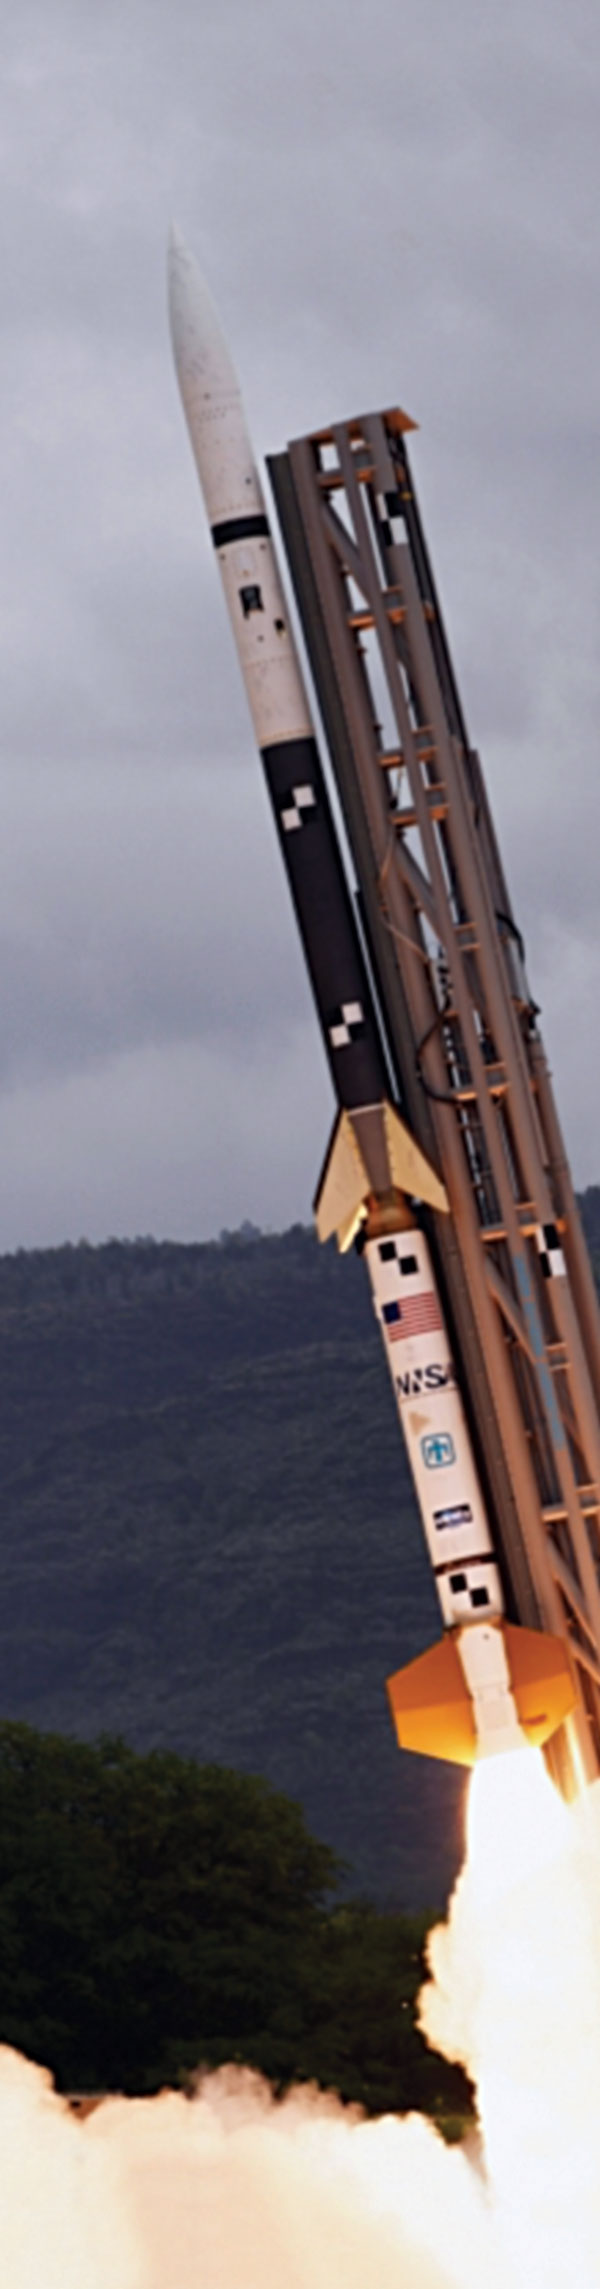 High Operational Tempo sounding rocket launch